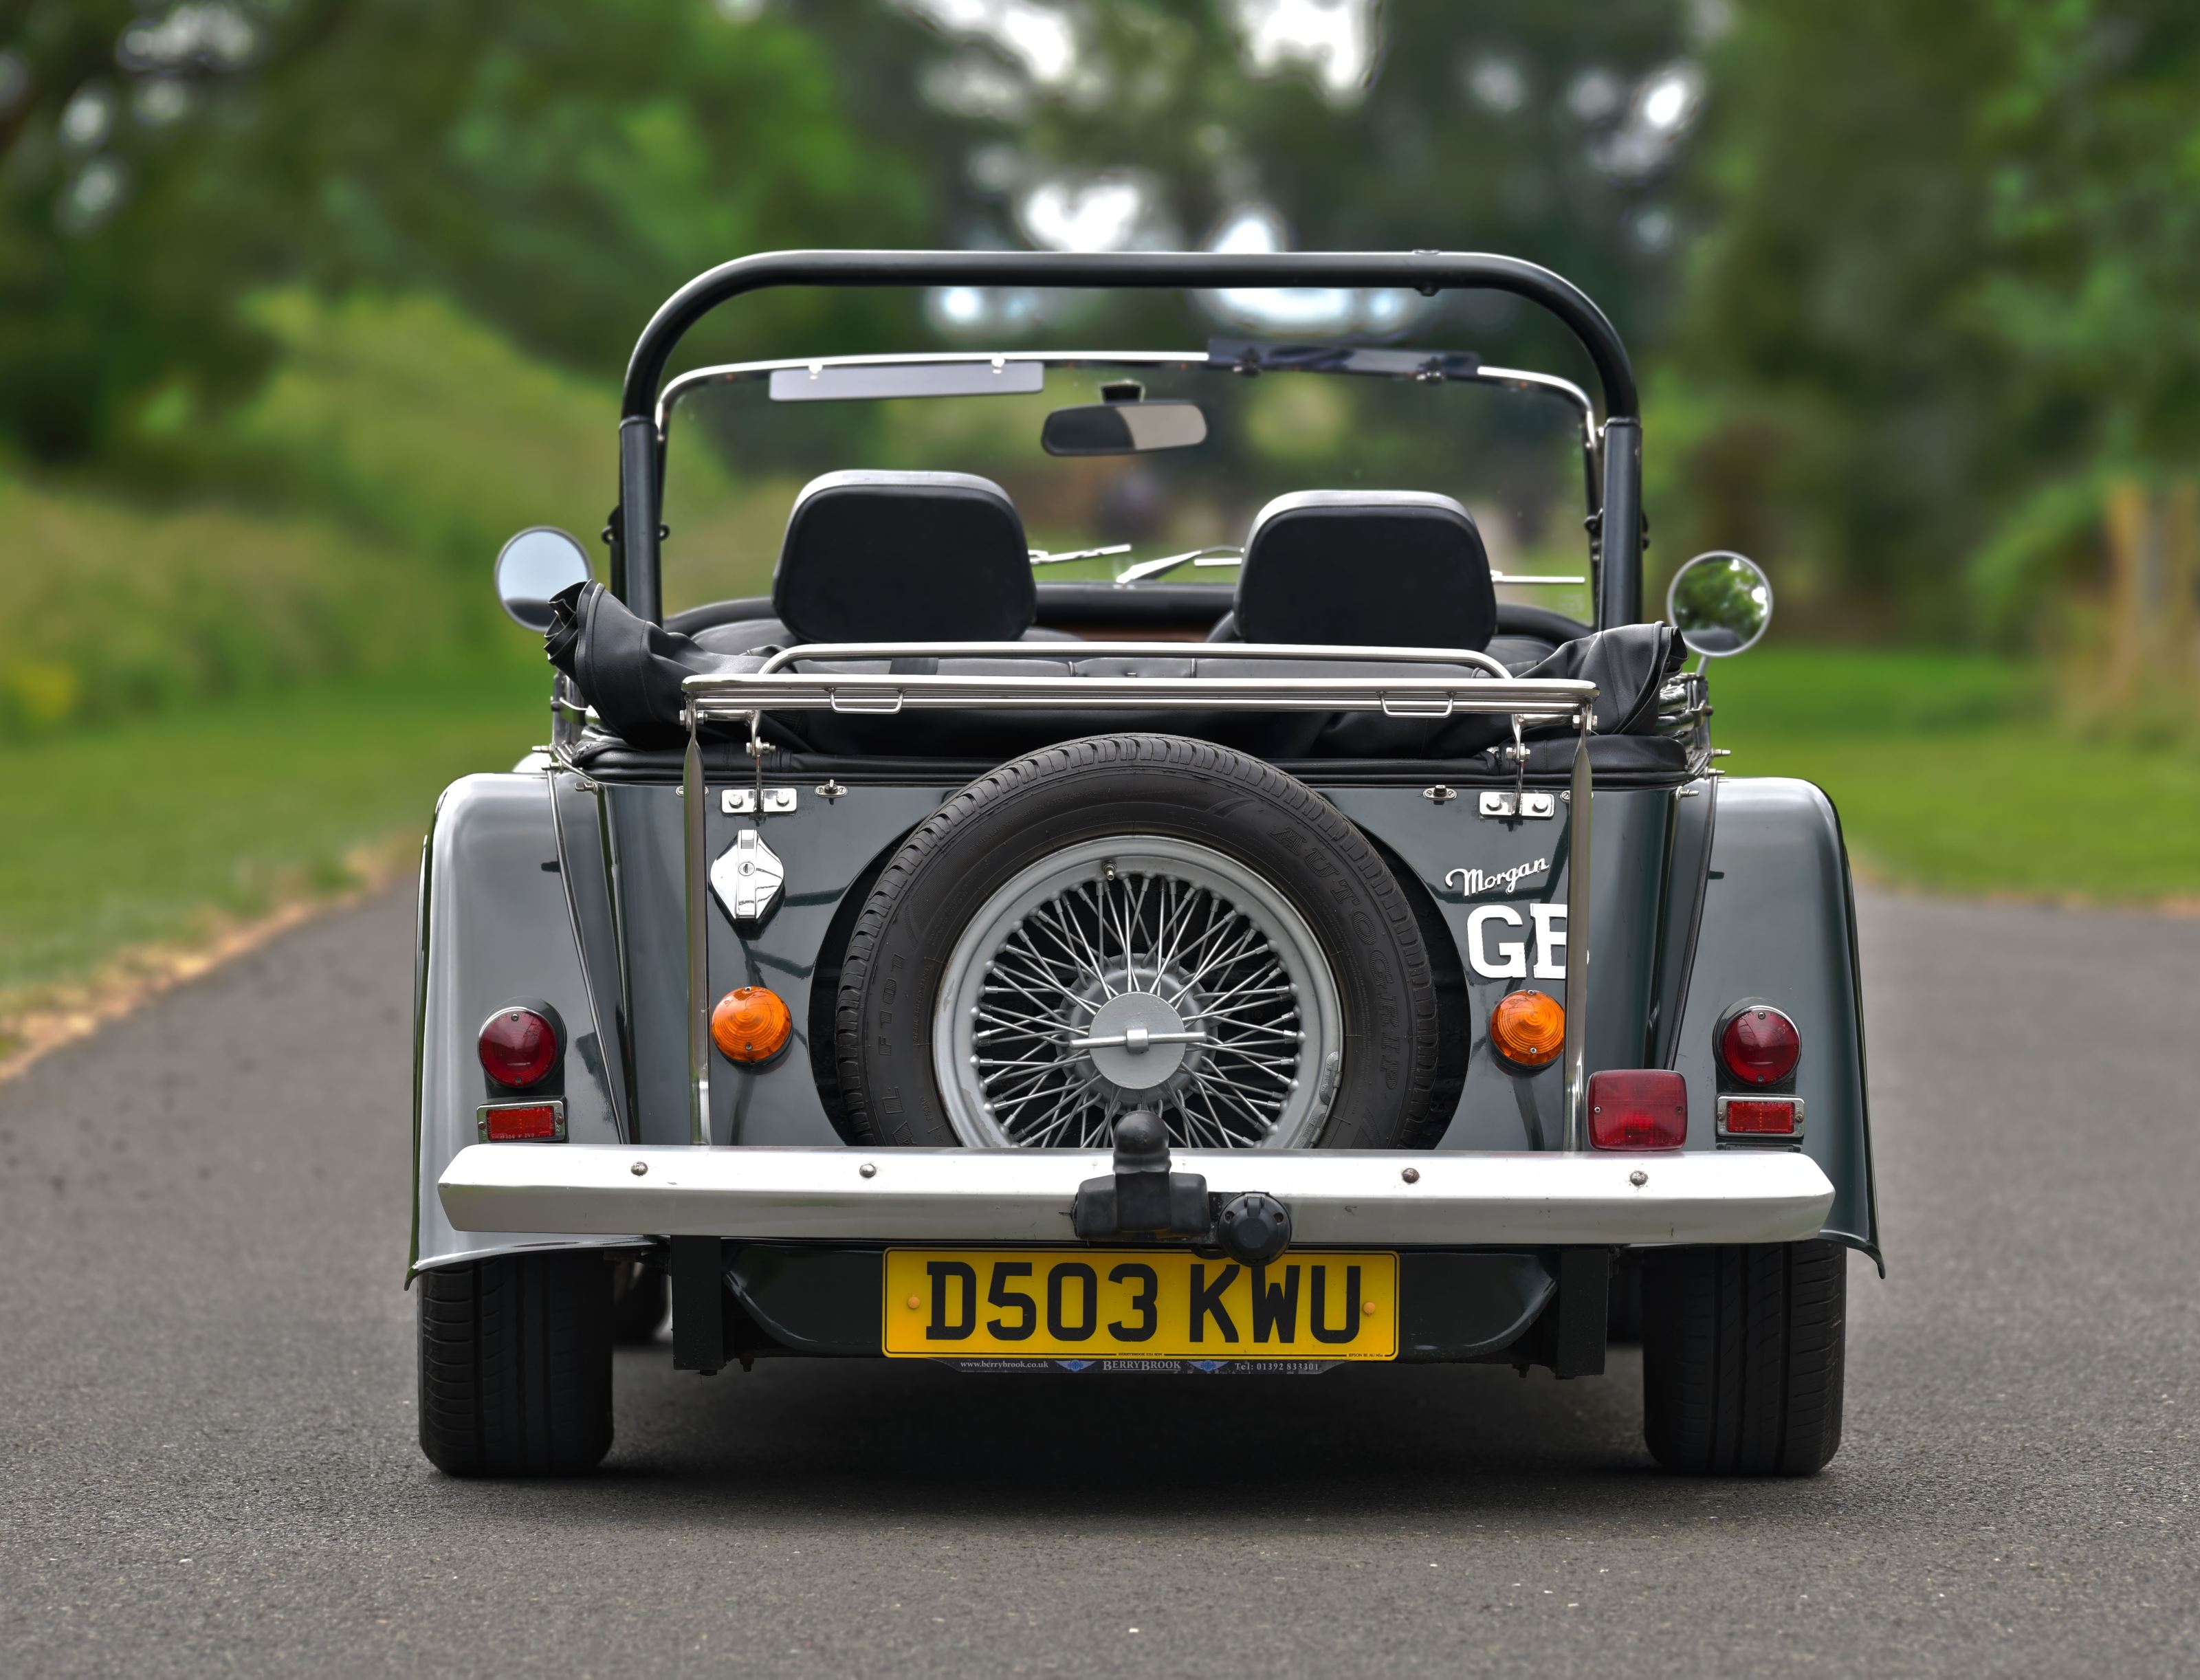 Morgan 44 4 seater with plus 4 body. 1hpmux1tputvurb s1tof